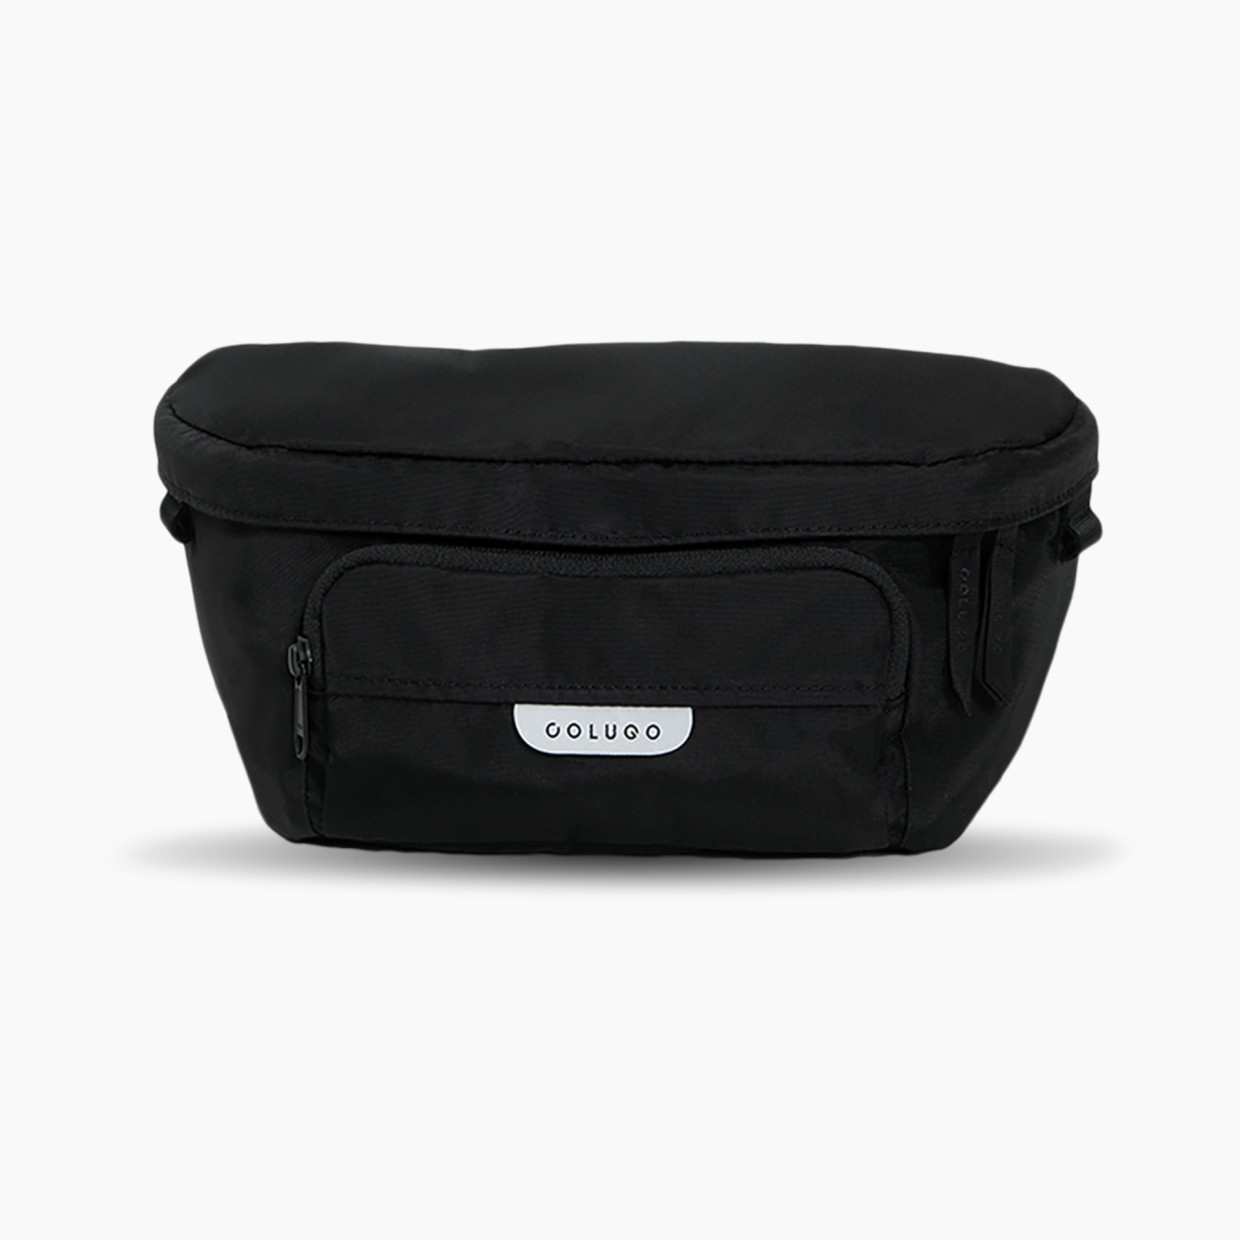 Colugo The On The Go Organizer and Fanny Pack 2020 - Black.